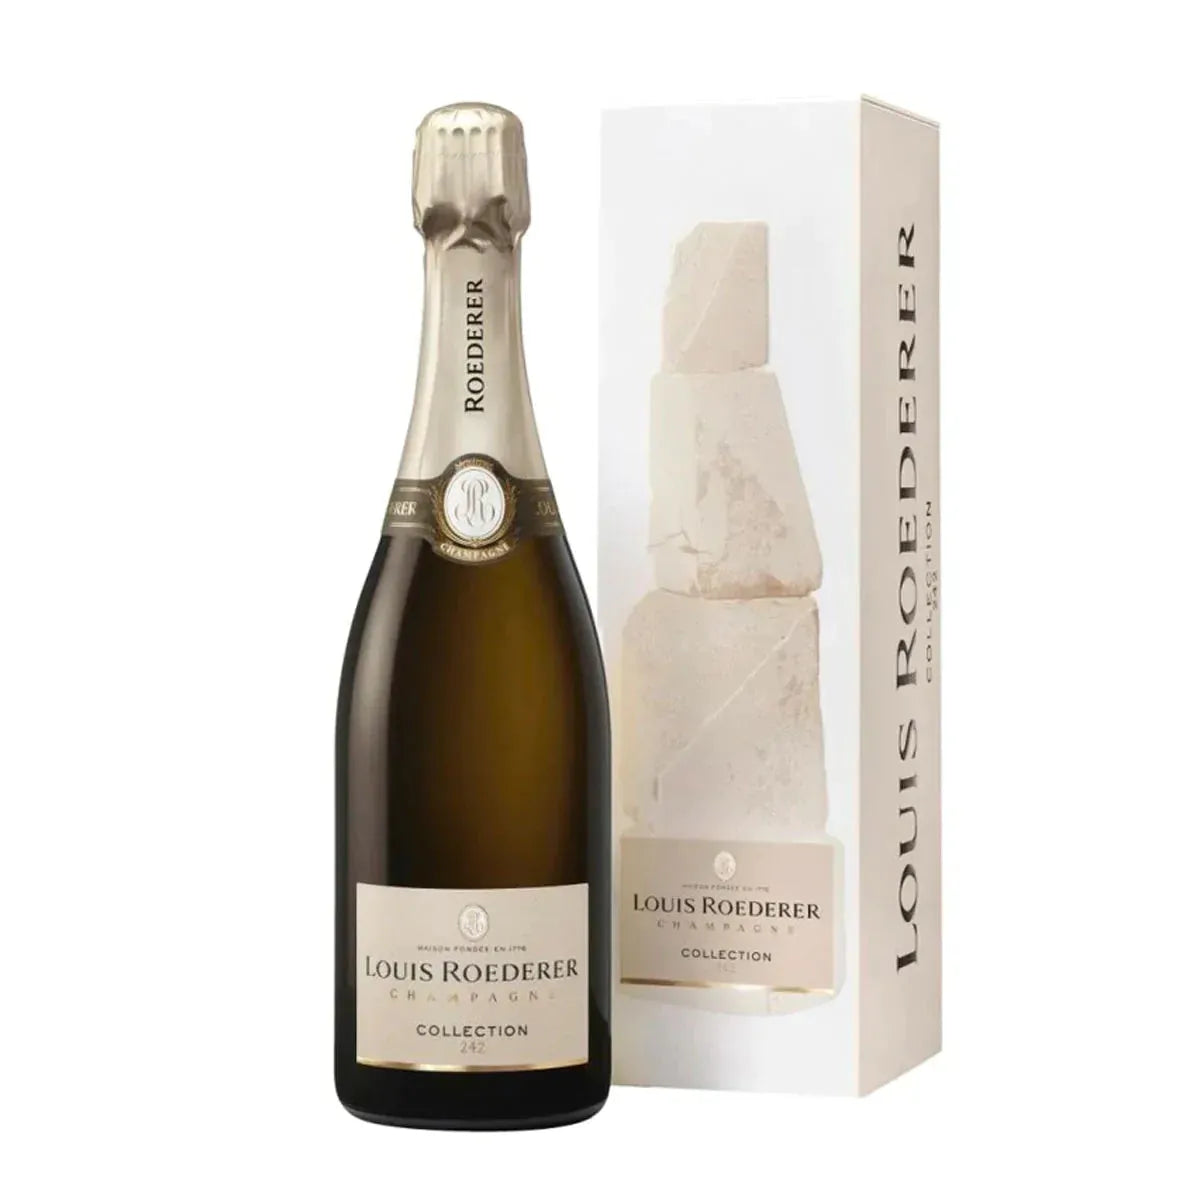 LOUIS ROEDERER COLLECTION 242 CHAMPAGNE MAGNUM